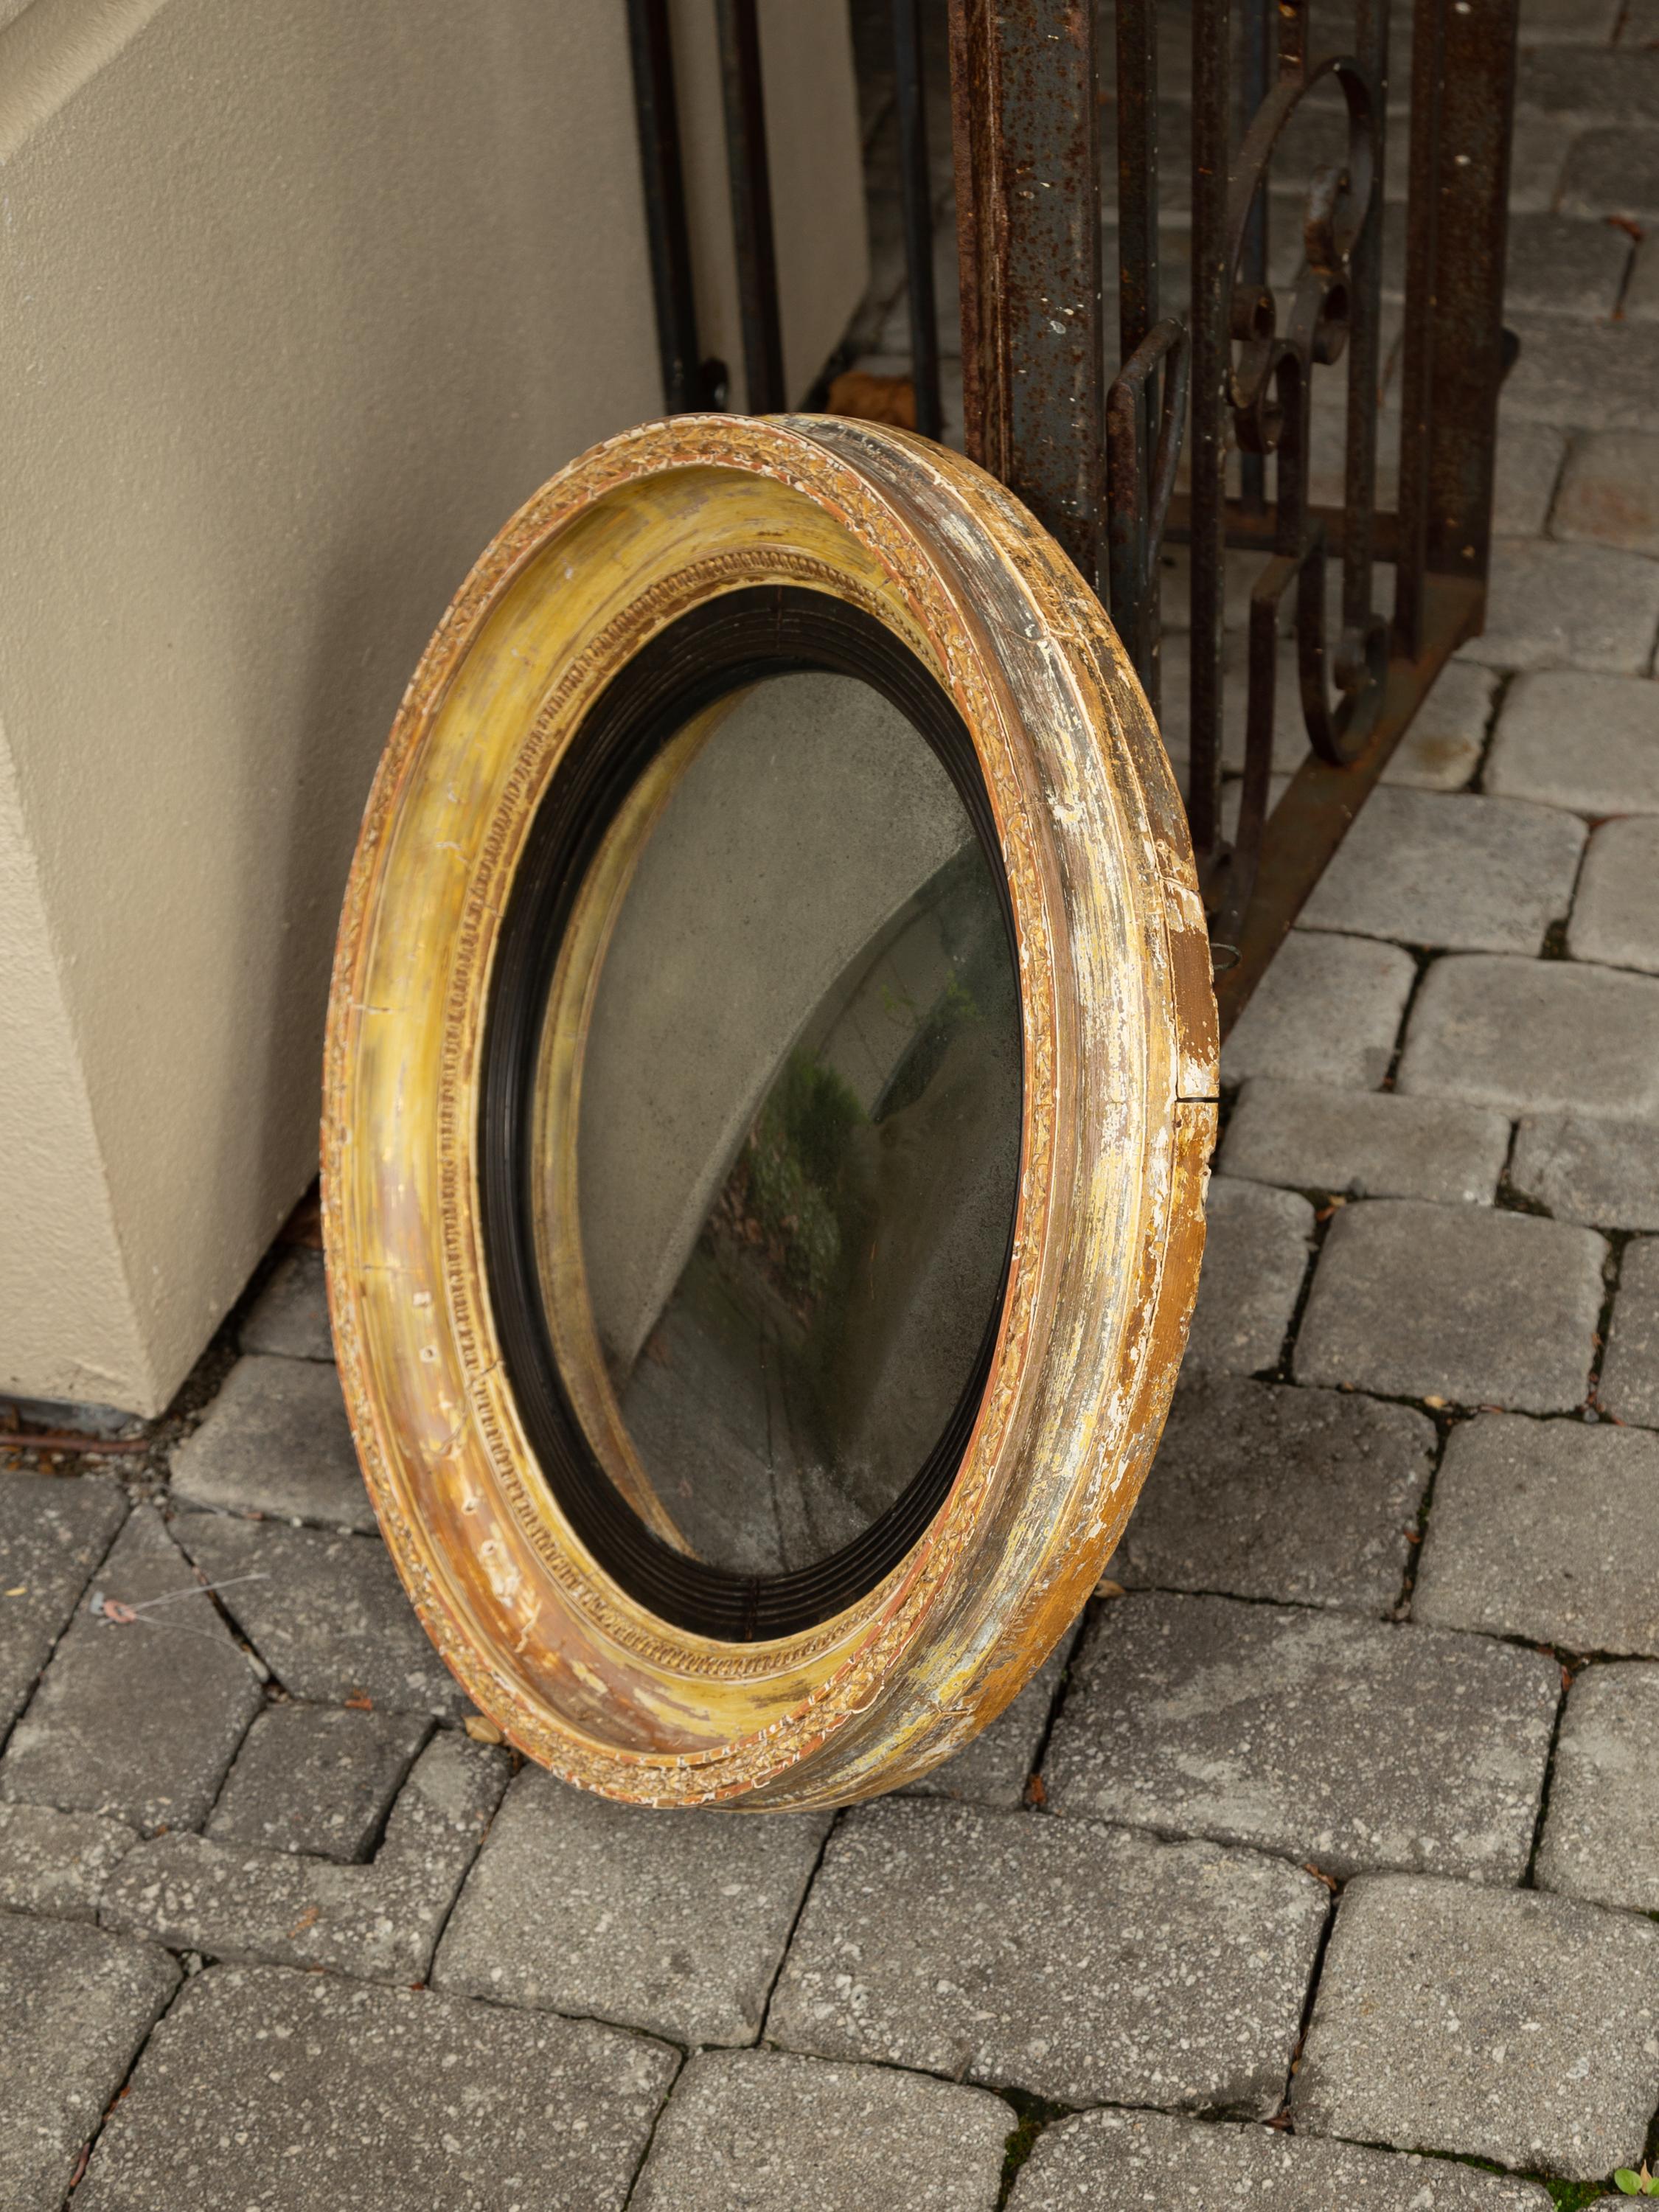 English 1870s Distressed Wood Convex Bullseye Mirror with Ebonized Accents 8